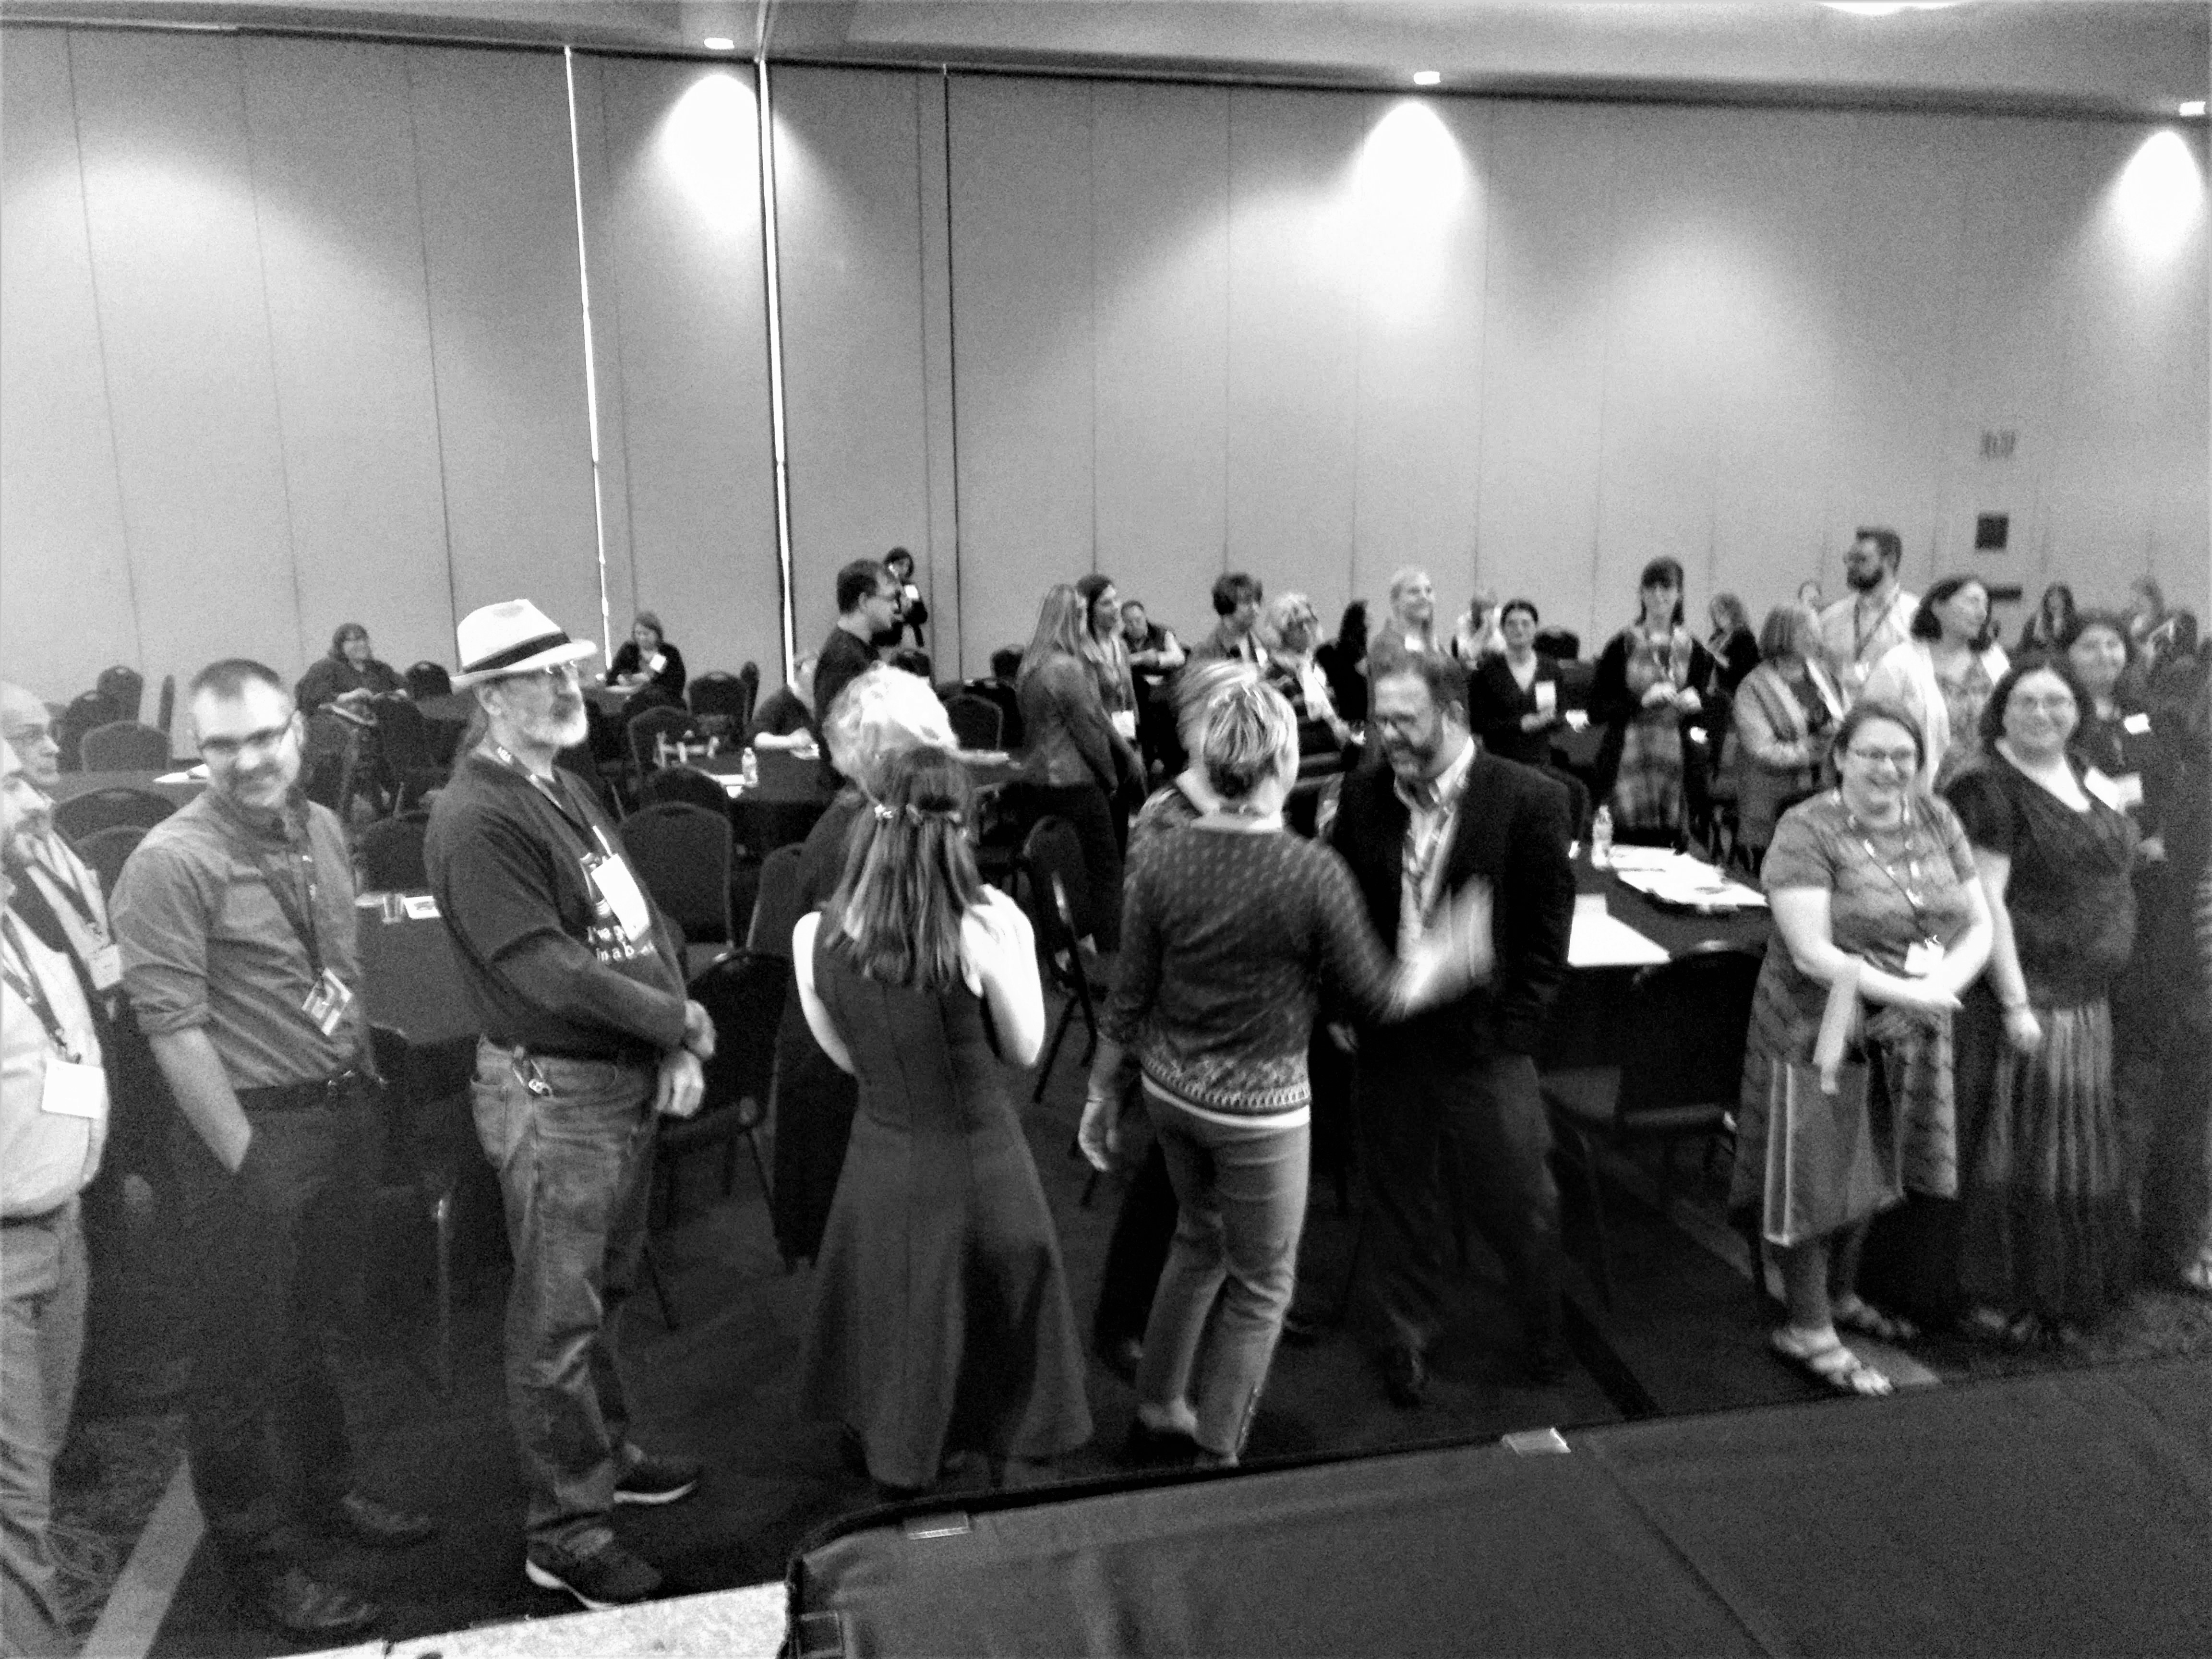 Members line up to sign MLA Equity, Diversity and Inclusion statement on October 17, 2020 at the annual meeting during MLA 2020 Annual Conference at the Suburban Collection Showplace in Novi, MI.